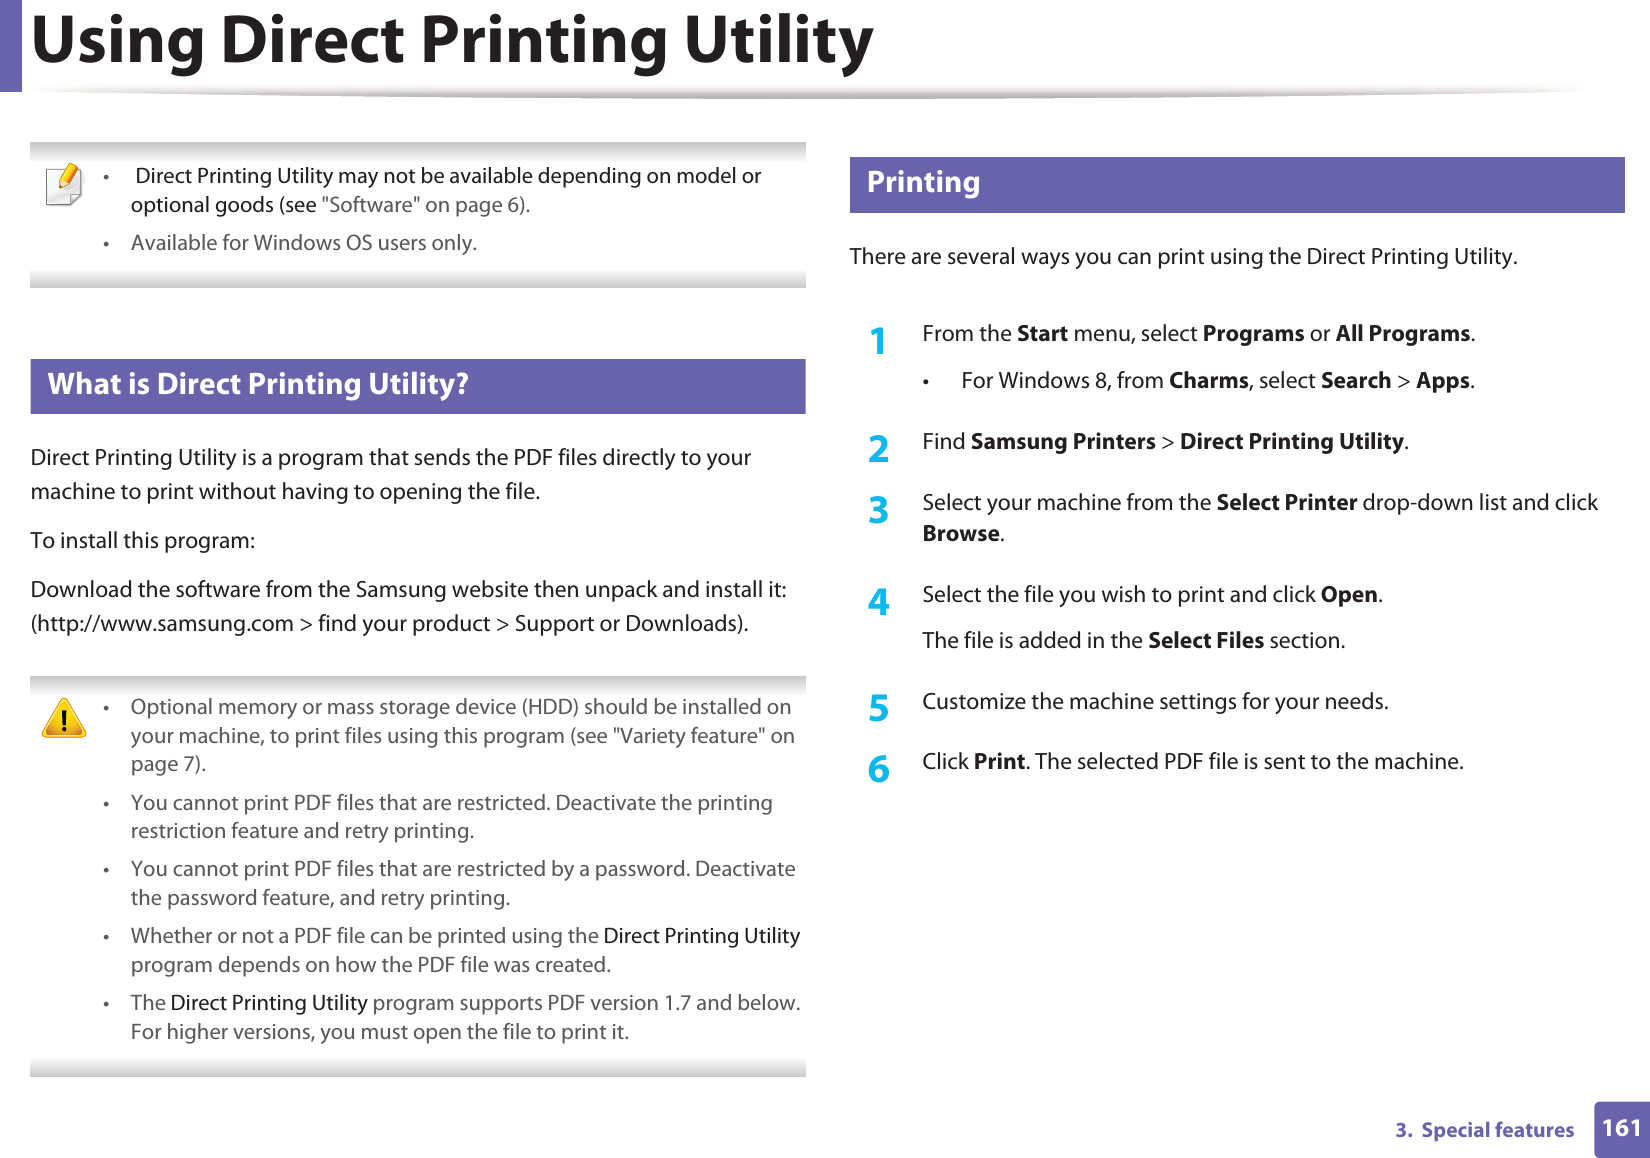 1613.  Special featuresUsing Direct Printing Utility • Direct Printing Utility may not be available depending on model or optional goods (see &quot;Software&quot; on page 6). • Available for Windows OS users only. 3 What is Direct Printing Utility?Direct Printing Utility is a program that sends the PDF files directly to your machine to print without having to opening the file.To install this program:Download the software from the Samsung website then unpack and install it: (http://www.samsung.com &gt; find your product &gt; Support or Downloads). • Optional memory or mass storage device (HDD) should be installed on your machine, to print files using this program (see &quot;Variety feature&quot; on page 7).• You cannot print PDF files that are restricted. Deactivate the printing restriction feature and retry printing.• You cannot print PDF files that are restricted by a password. Deactivate the password feature, and retry printing.• Whether or not a PDF file can be printed using the Direct Printing Utility program depends on how the PDF file was created.• The Direct Printing Utility program supports PDF version 1.7 and below. For higher versions, you must open the file to print it. 4 PrintingThere are several ways you can print using the Direct Printing Utility.1From the Start menu, select Programs or All Programs.• For Windows 8, from Charms, select Search &gt; Apps.2  Find Samsung Printers &gt; Direct Printing Utility.3  Select your machine from the Select Printer drop-down list and click Browse.4  Select the file you wish to print and click Open.The file is added in the Select Files section.5  Customize the machine settings for your needs. 6  Click Print. The selected PDF file is sent to the machine.